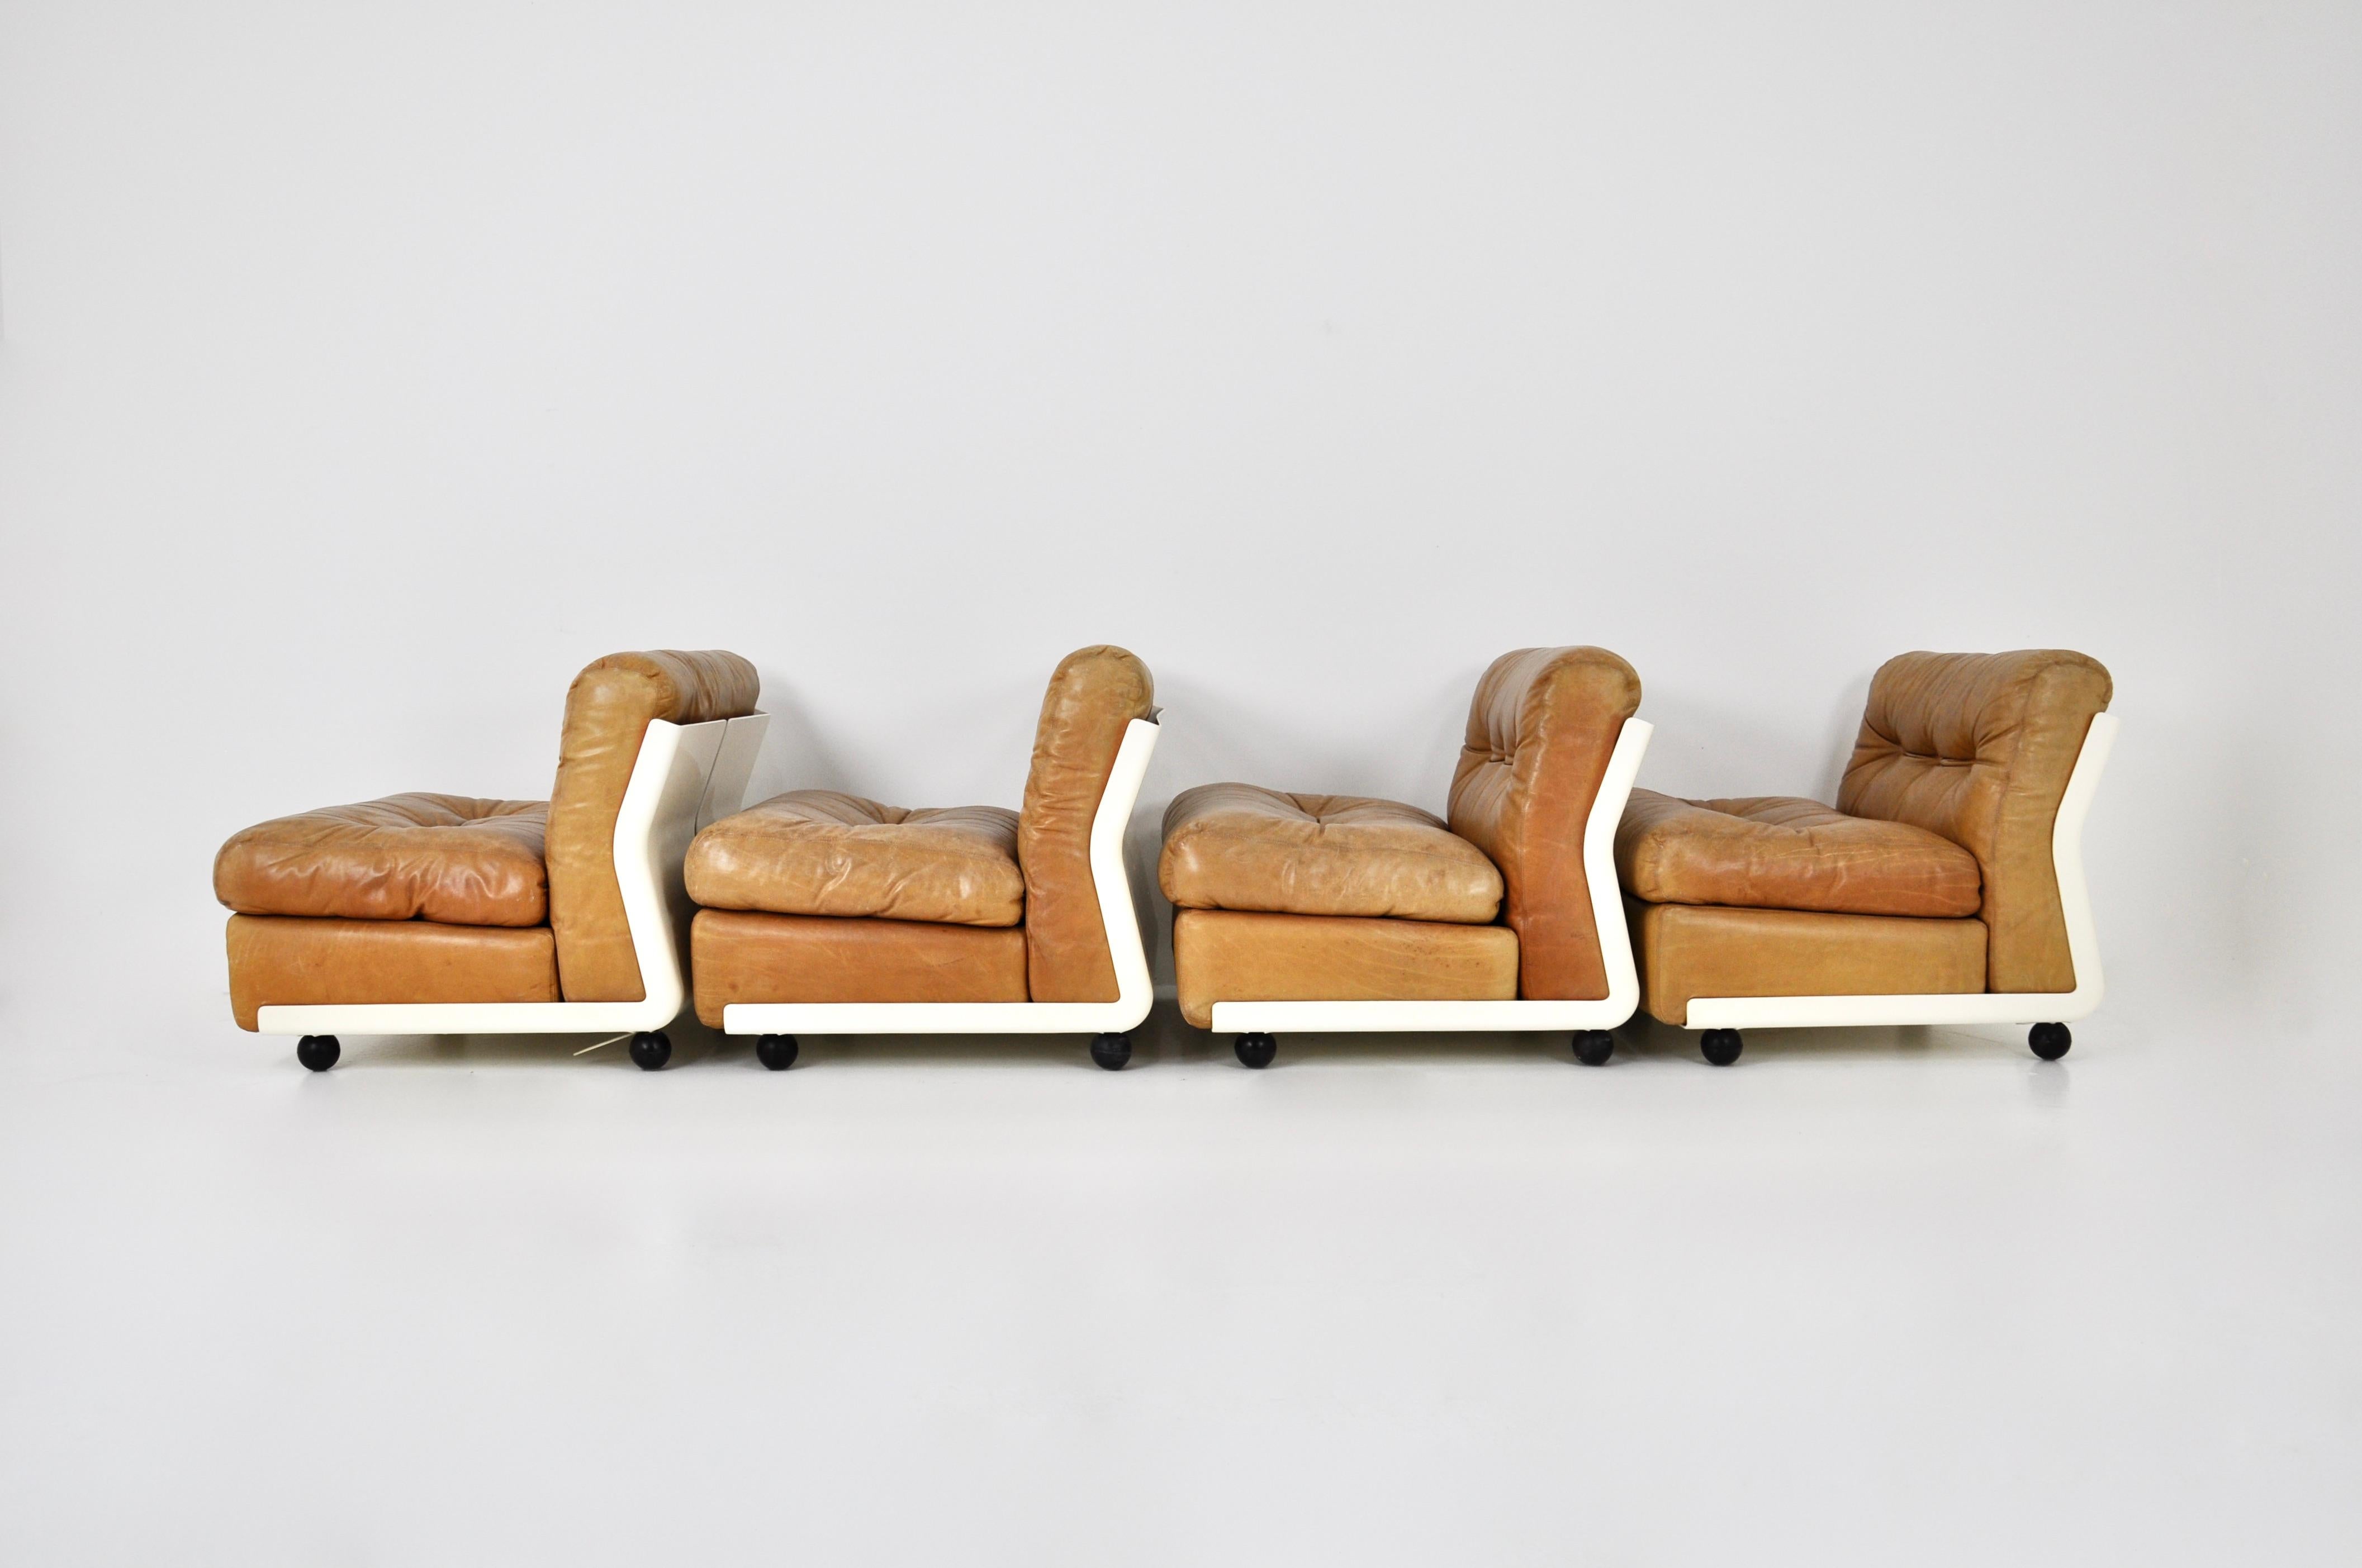 Amanta Lounge chairs by Mario Bellini for C&B Italia, 1960s set of 4 1